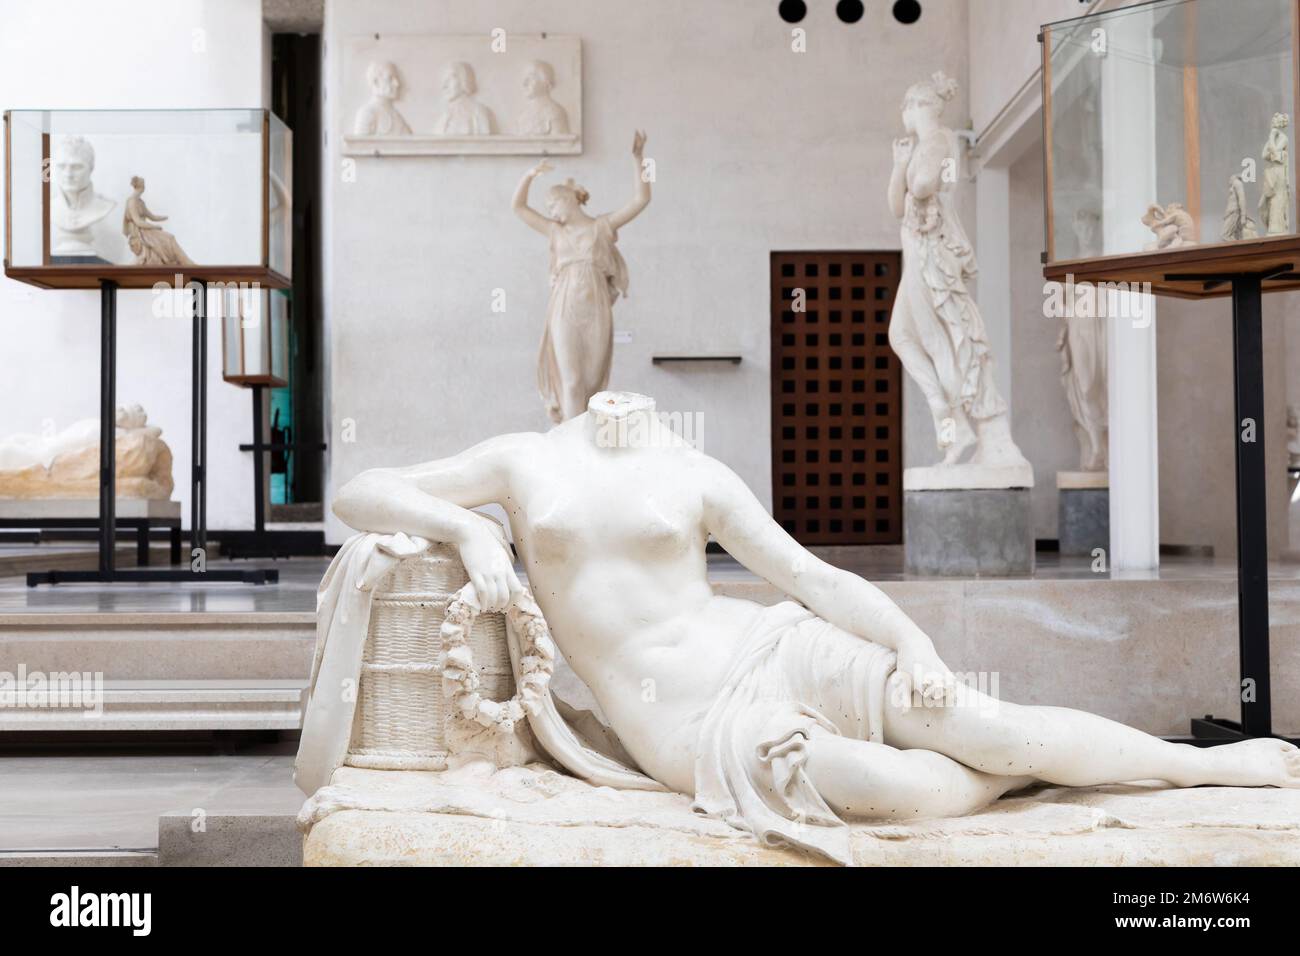 Antonio Canova collection. Classical sculptures in white marble, gallery of masterpieces Stock Photo